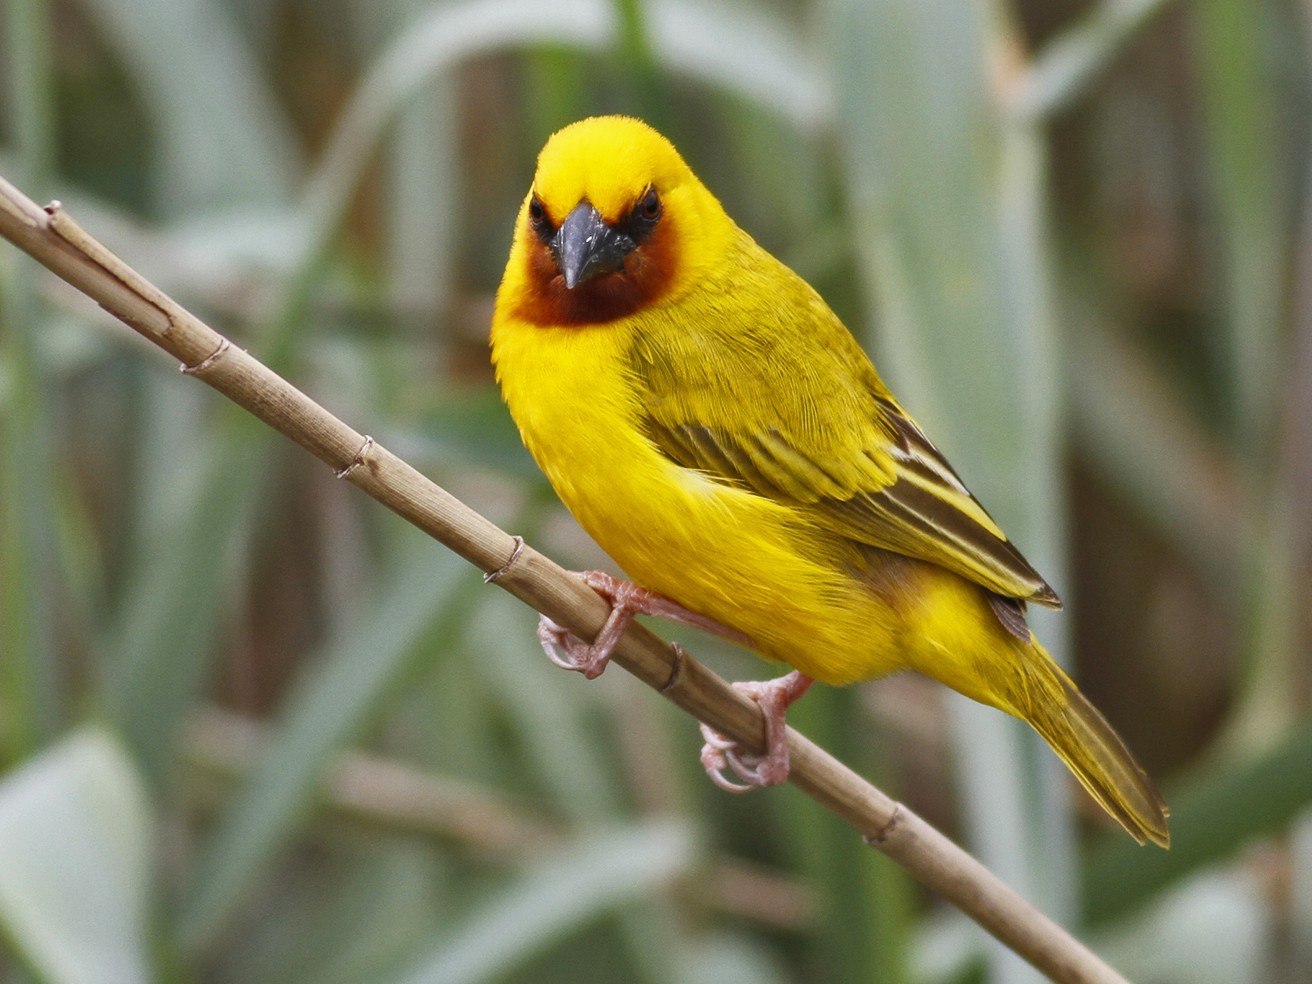 Southern Brown-throated Weaver - Carly Wainwright